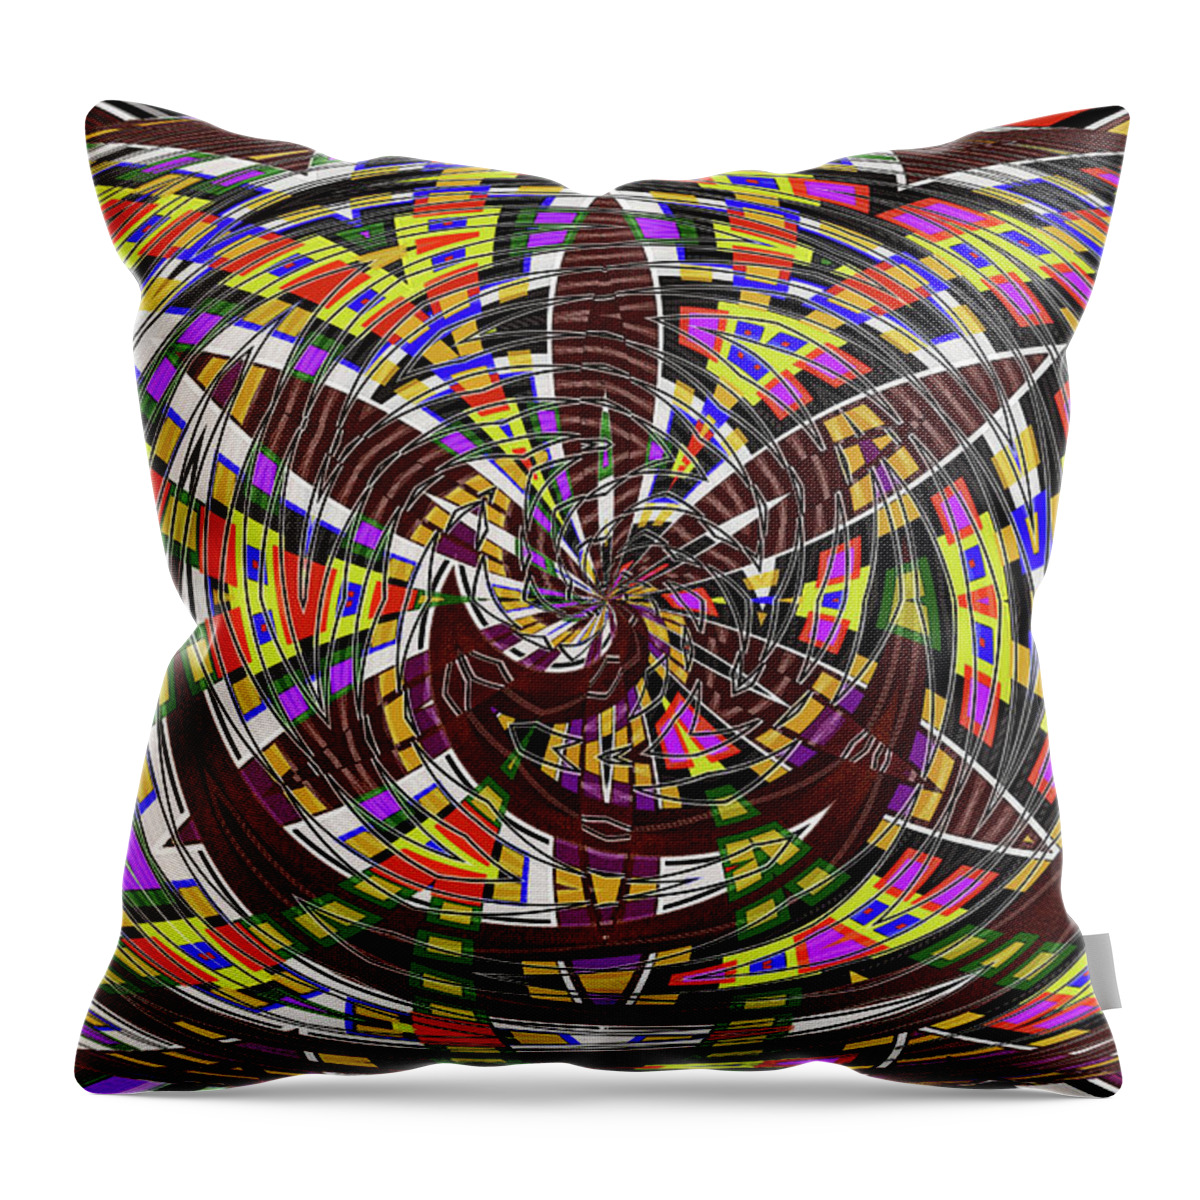 Janca Drawing Abstract #2557ew5a Throw Pillow featuring the digital art Janca Drawing Abstract #2557ew5a by Tom Janca